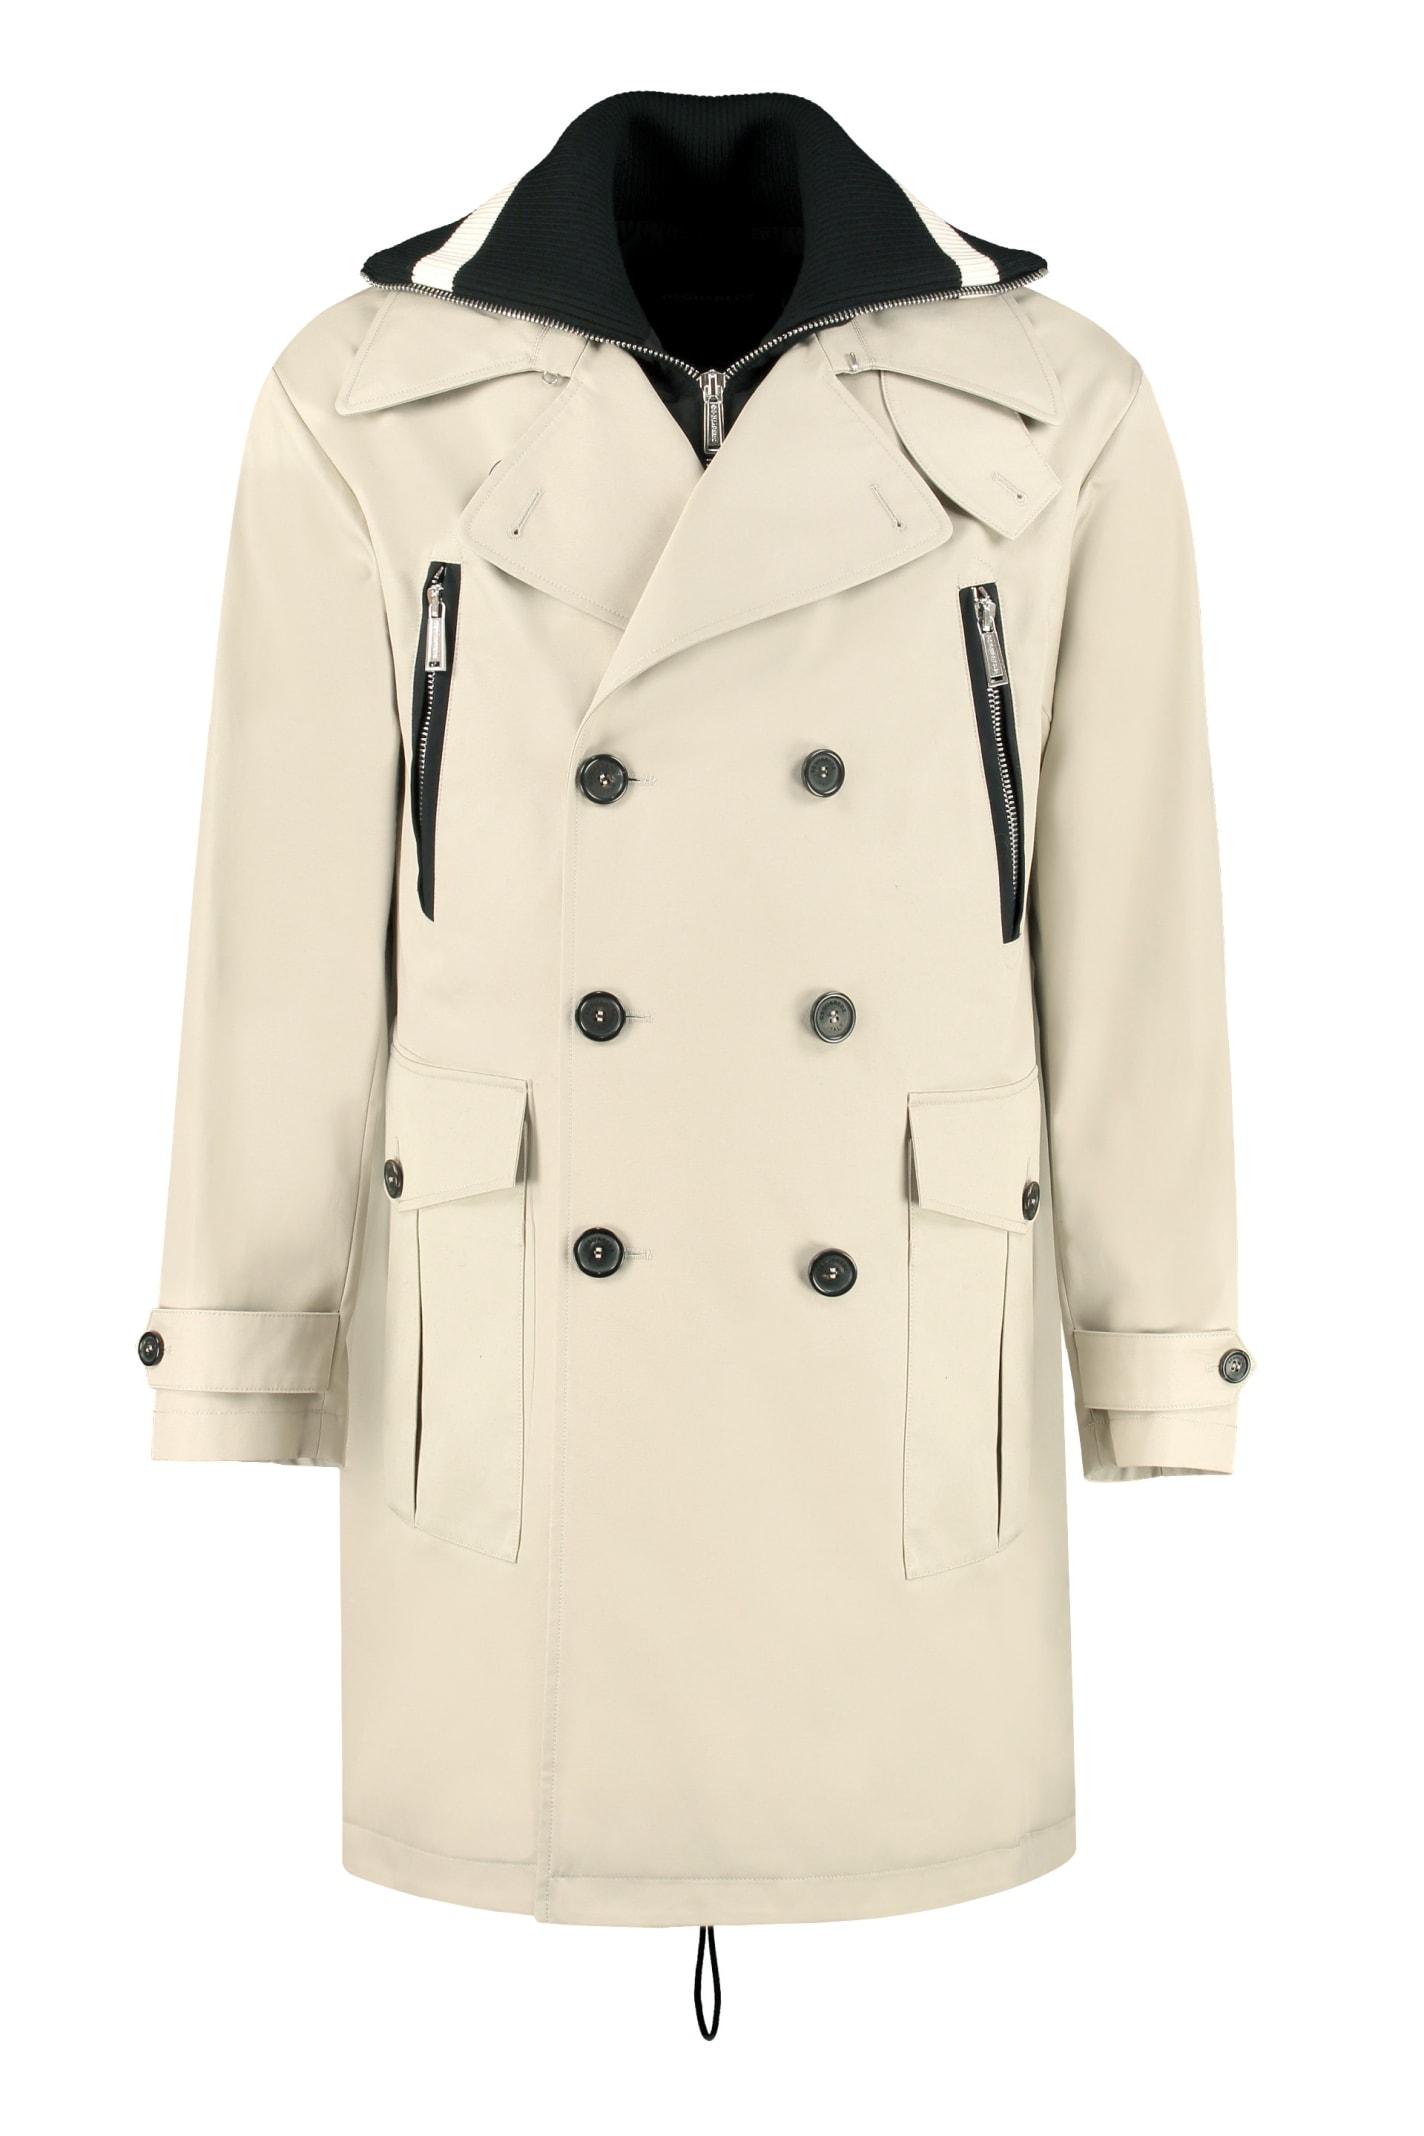 DSquared² Synthetic Double-breasted Trench Coat in Beige (Natural) for Men  - Lyst